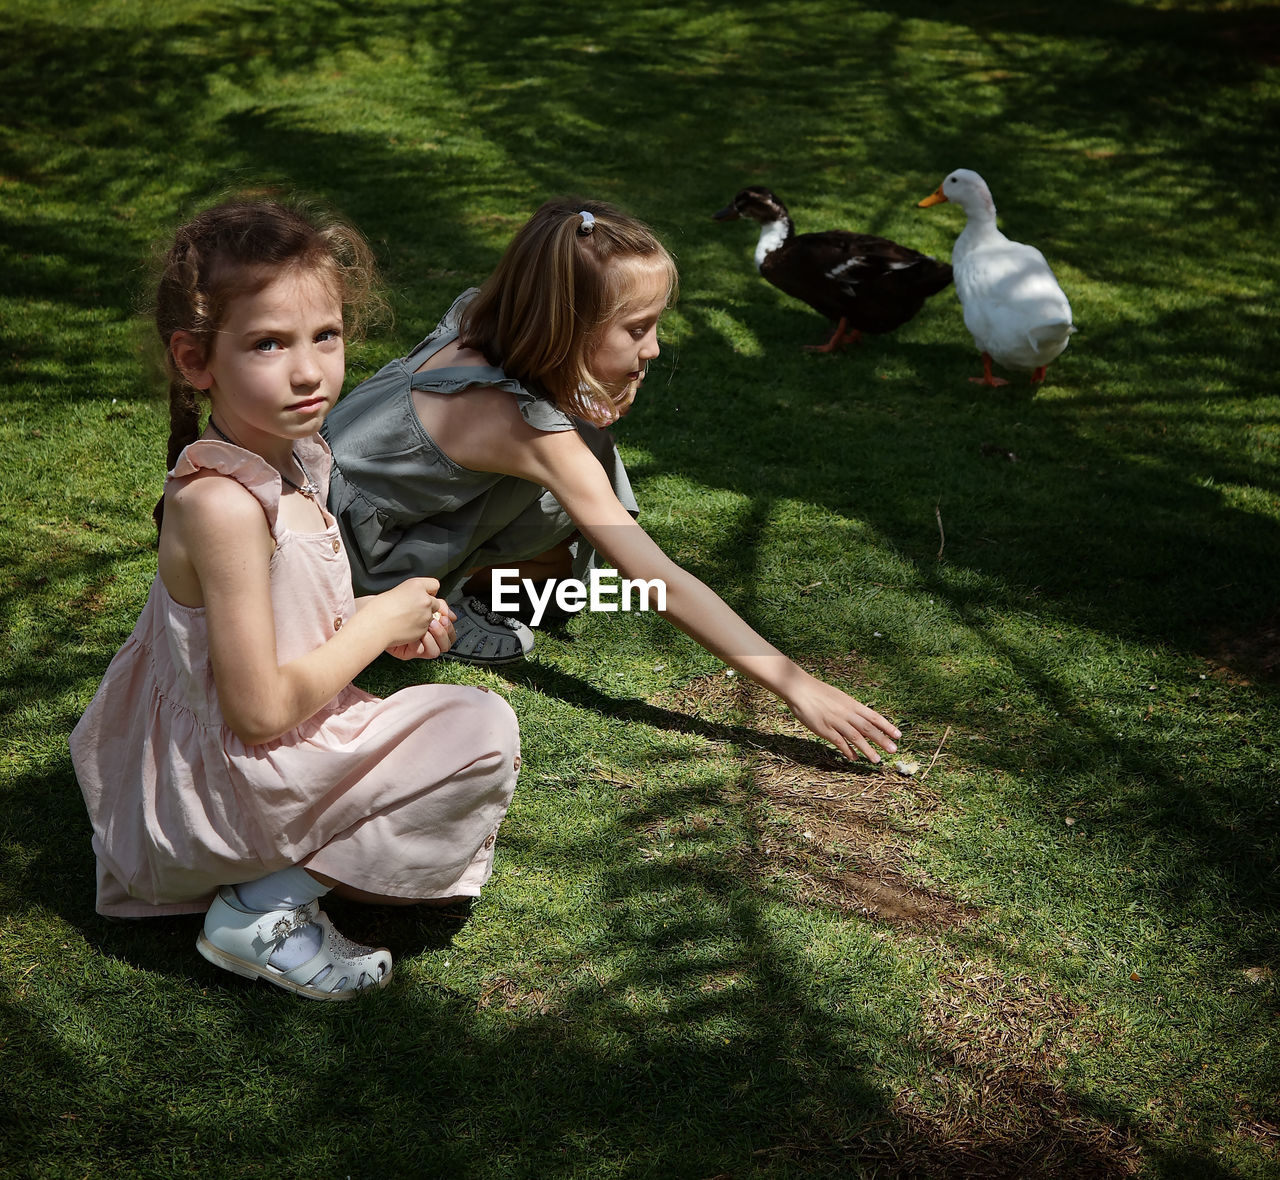 Two girls on grass with ducks 